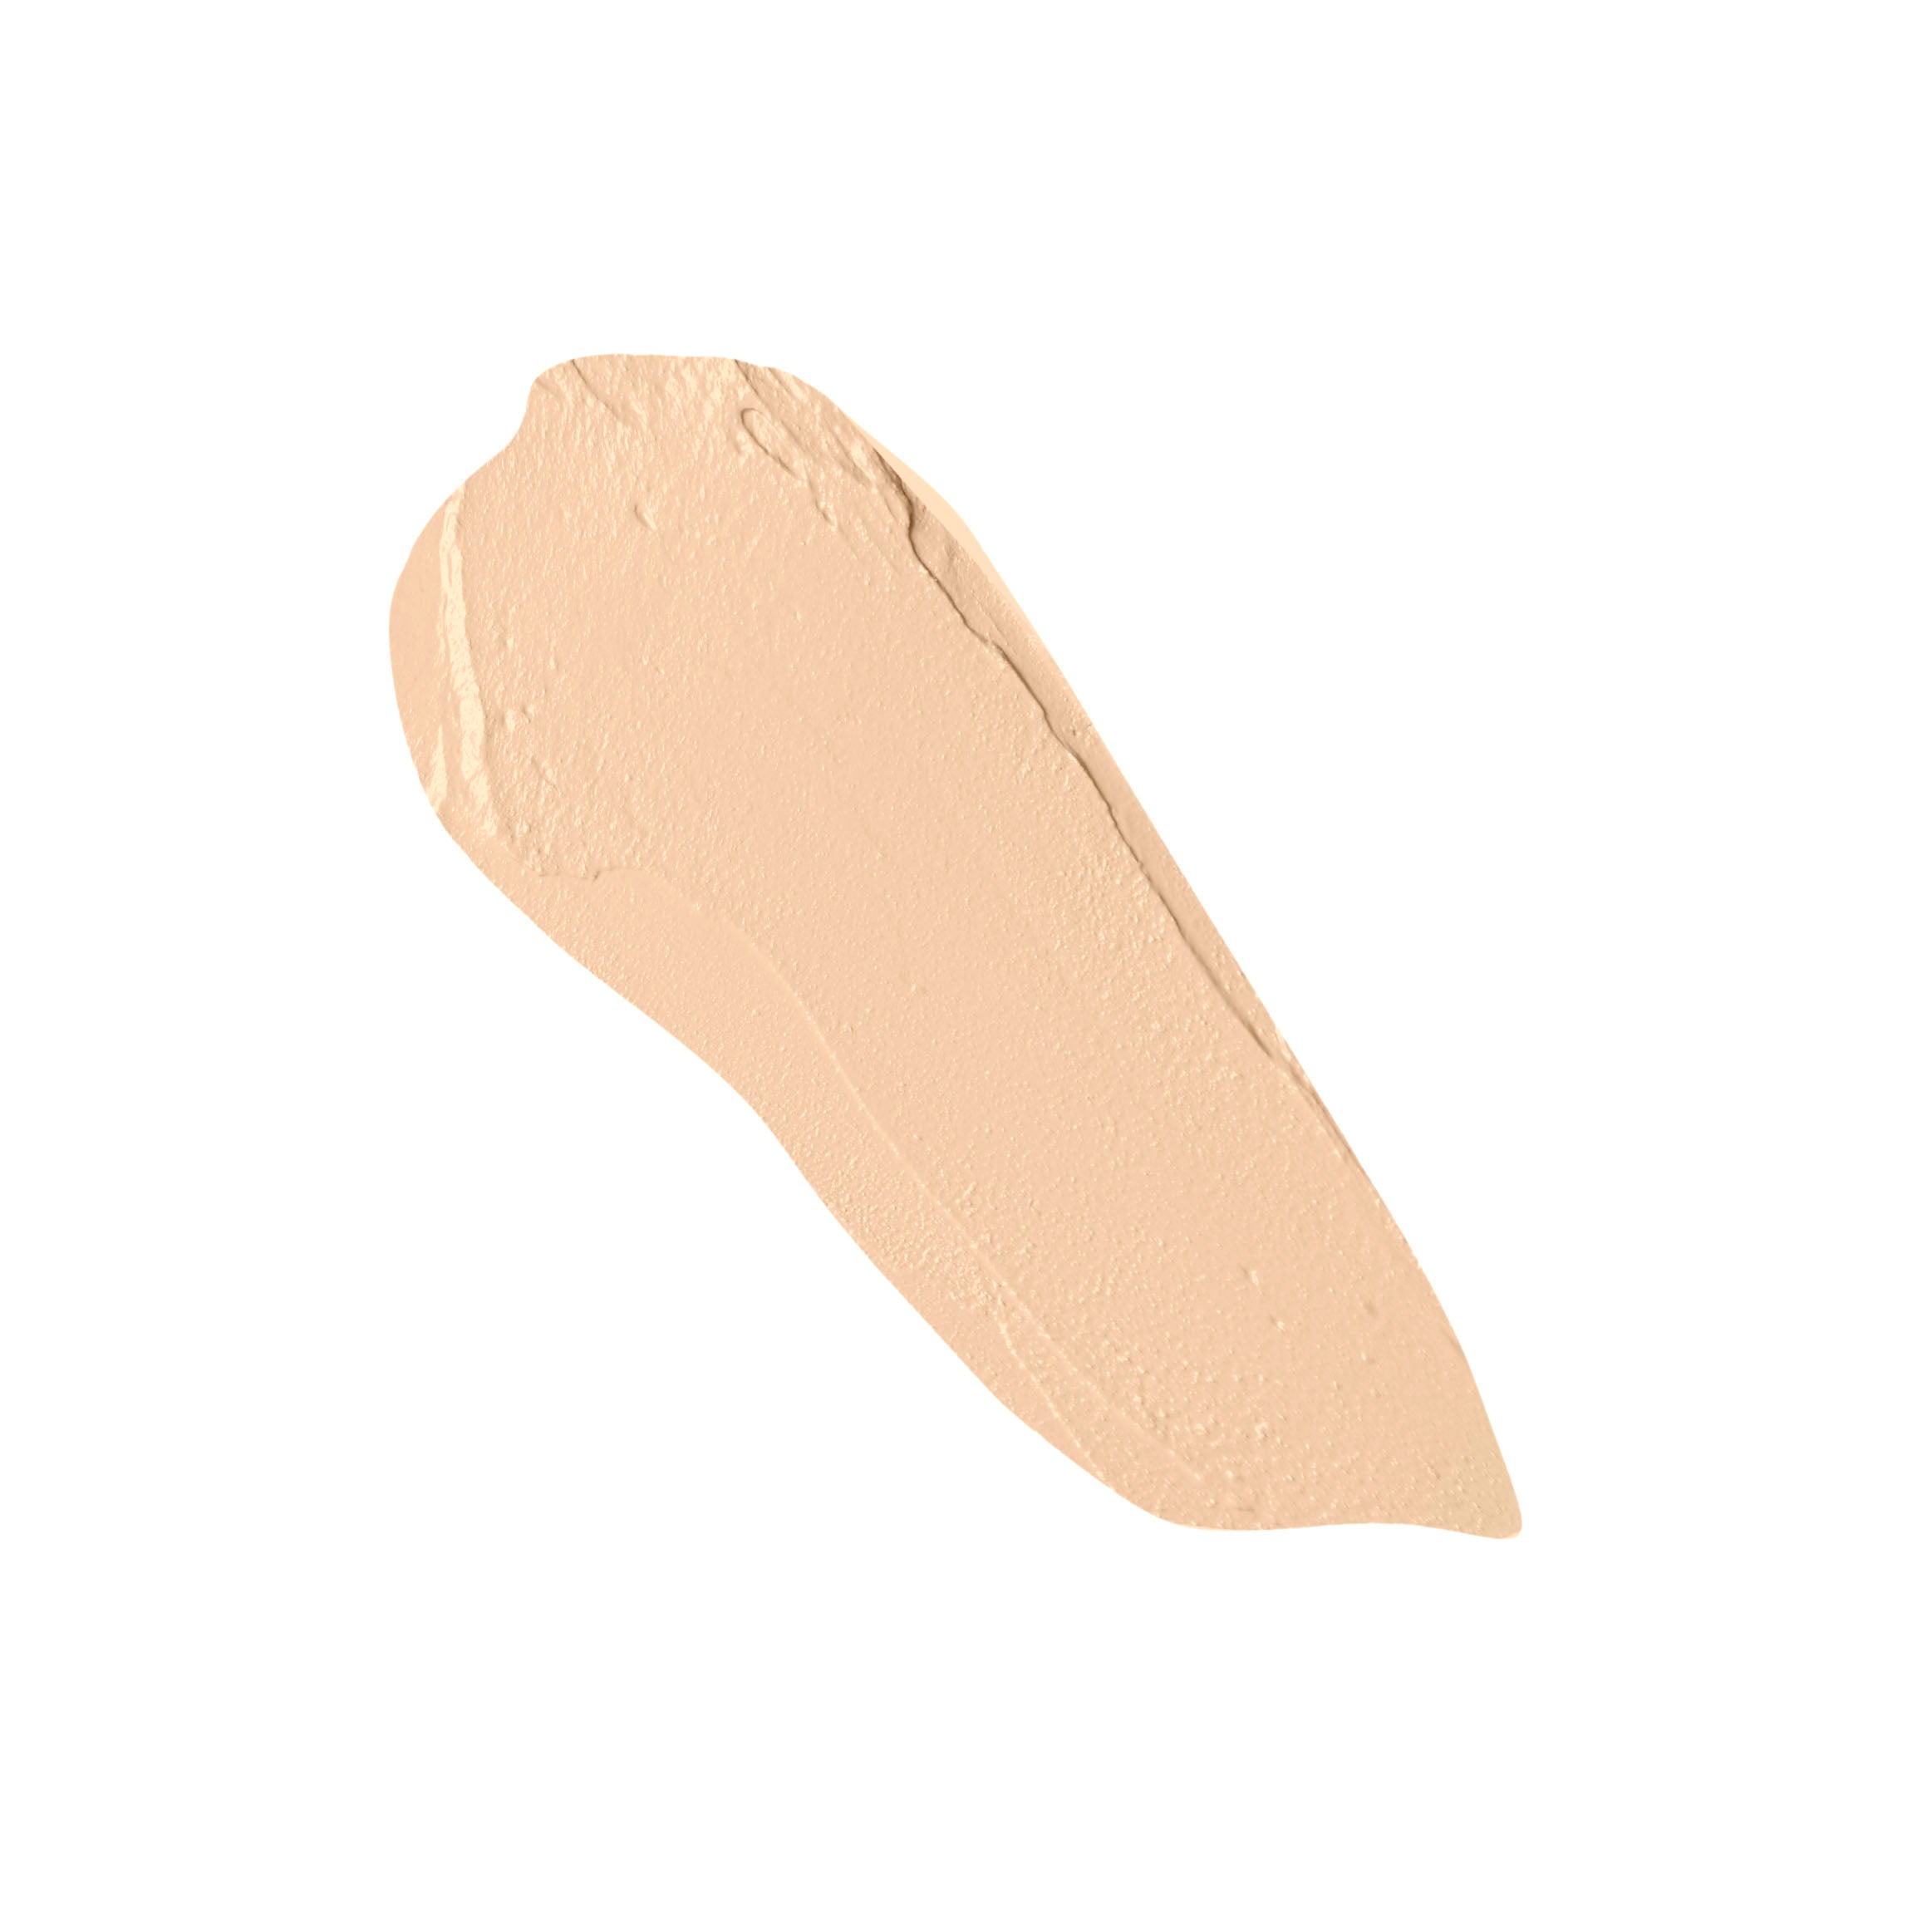 Rele-Wand™ 3-N-1 Foundation | Delight